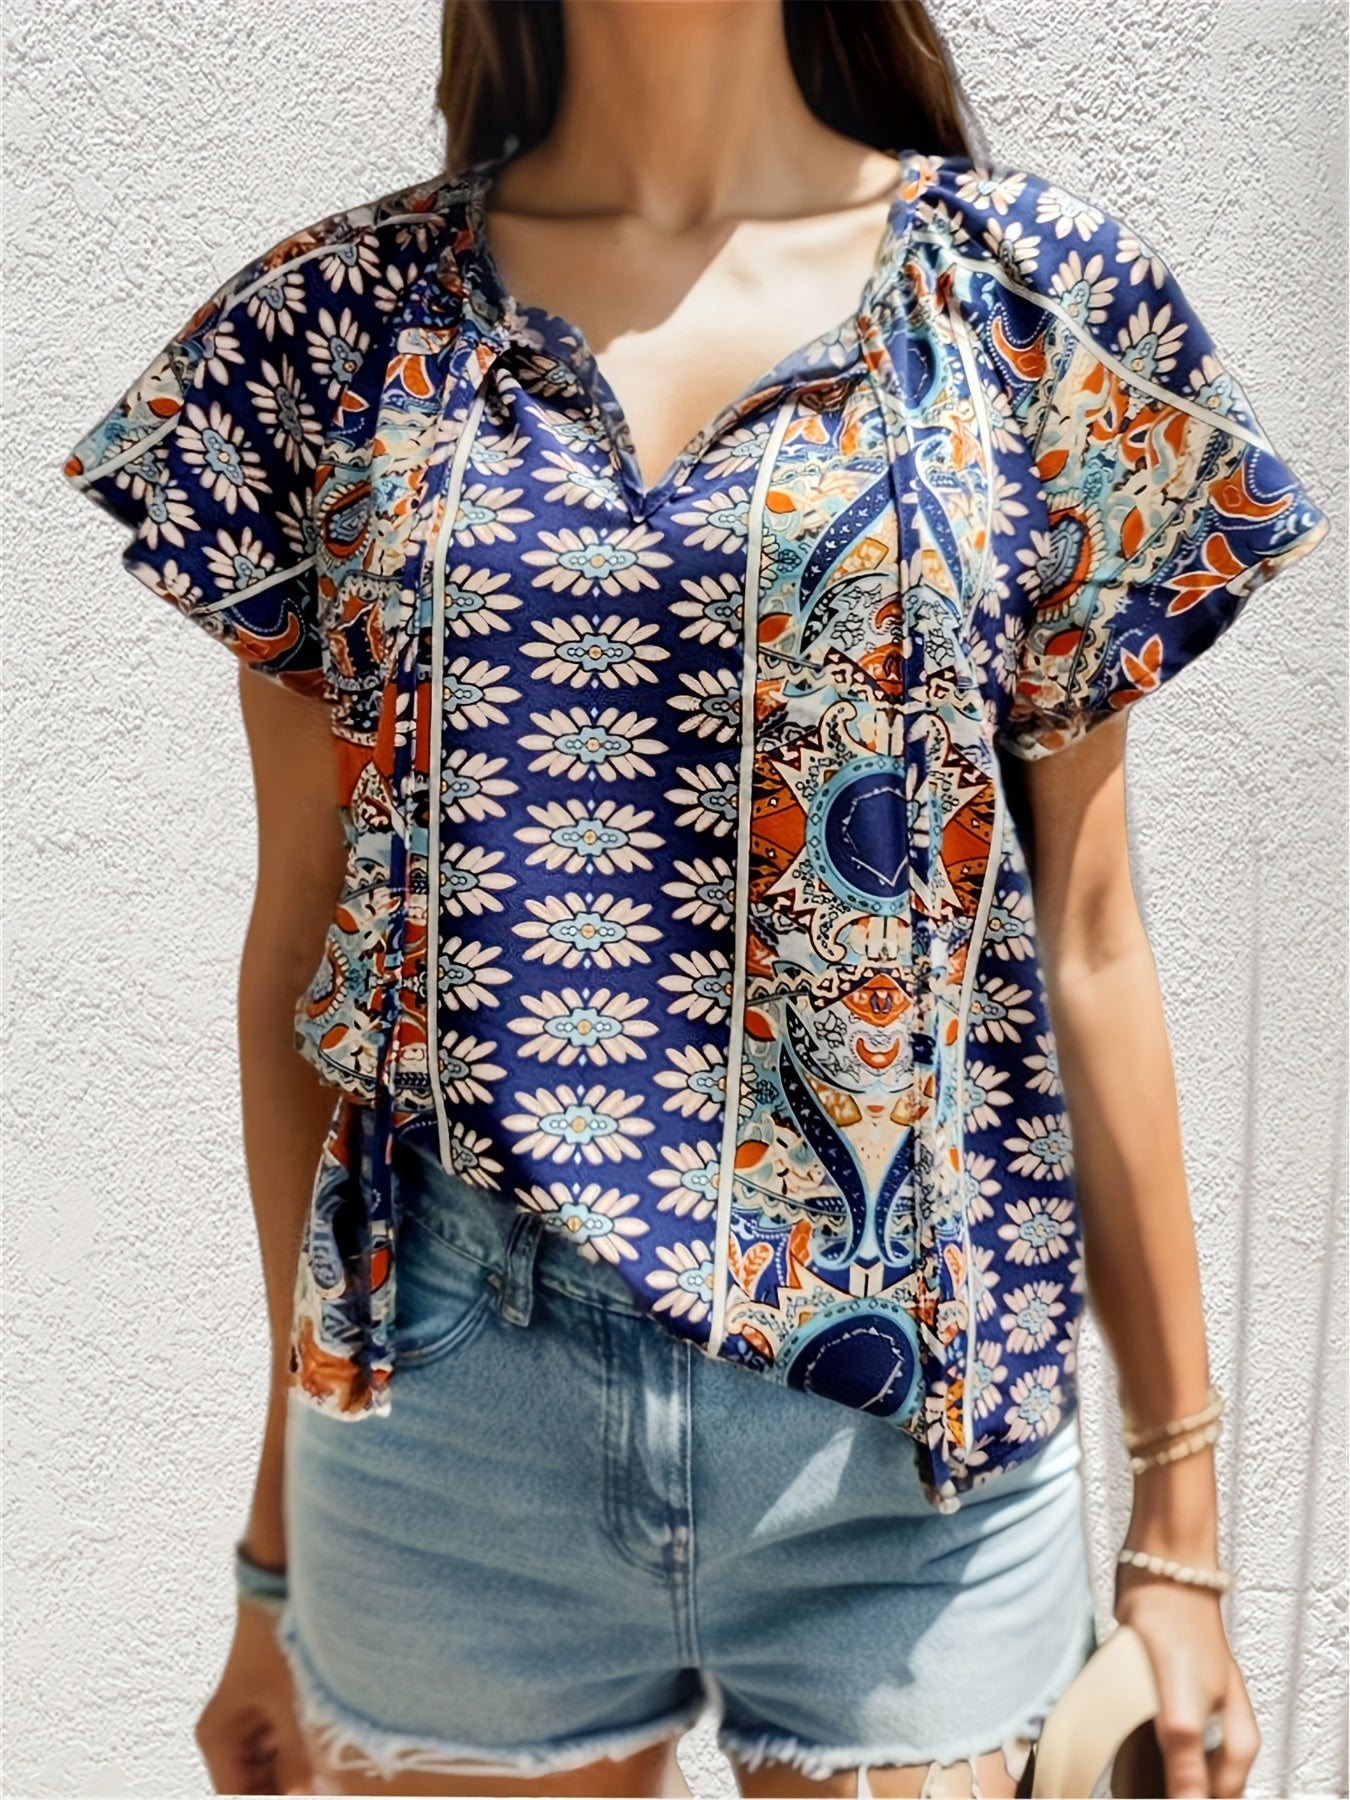 Graphic Print Casual Short Sleeve Blouse For Spring & Summer, Women's Blouse